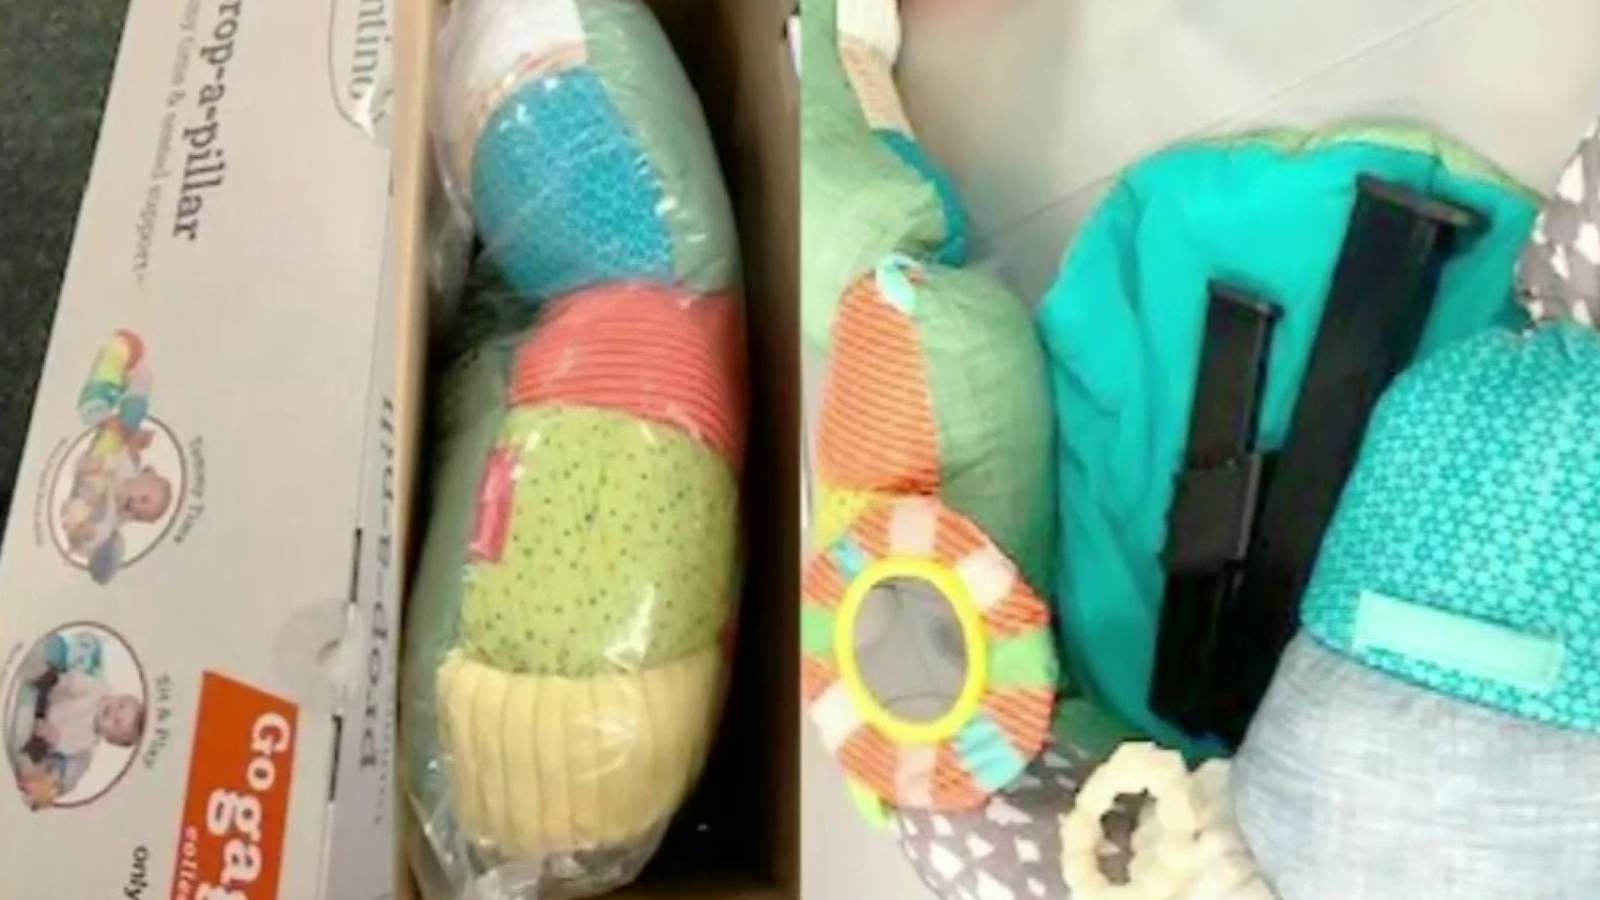 Bad baby: High-capacity magazine found hidden in infant toy at Orlando airport, TSA says